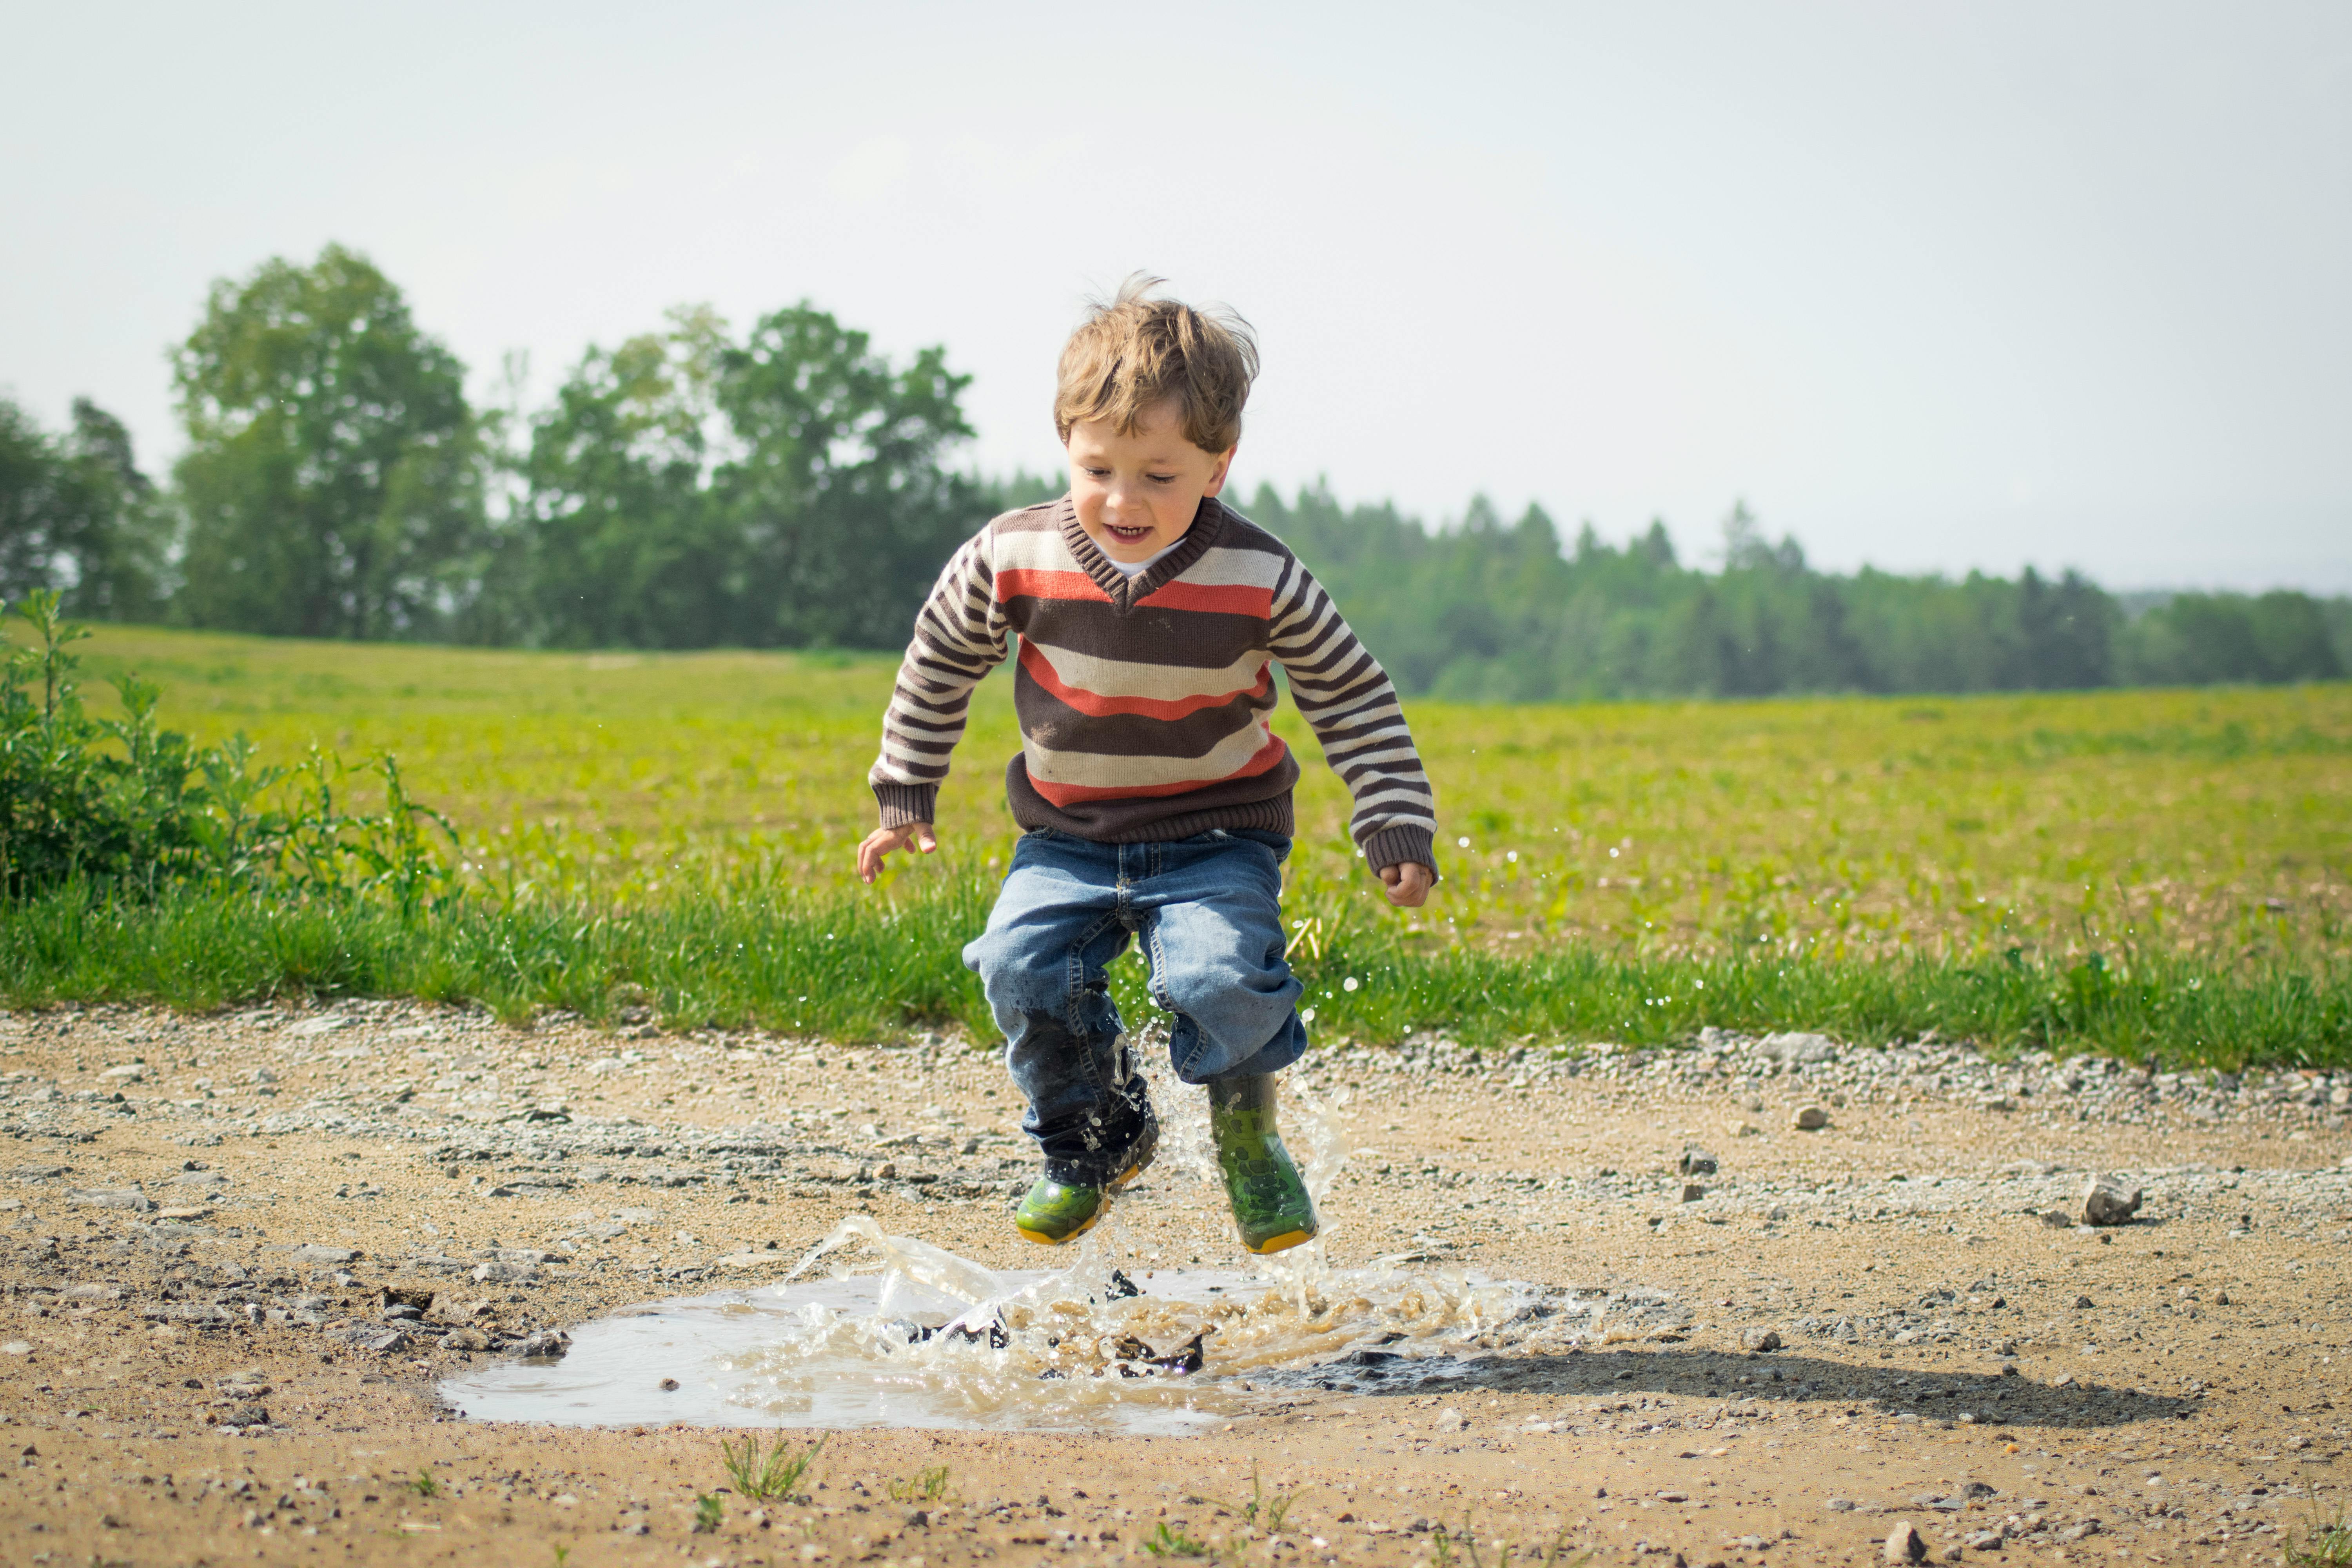 Little boy playing outside at daytime. | Photo: Pexels